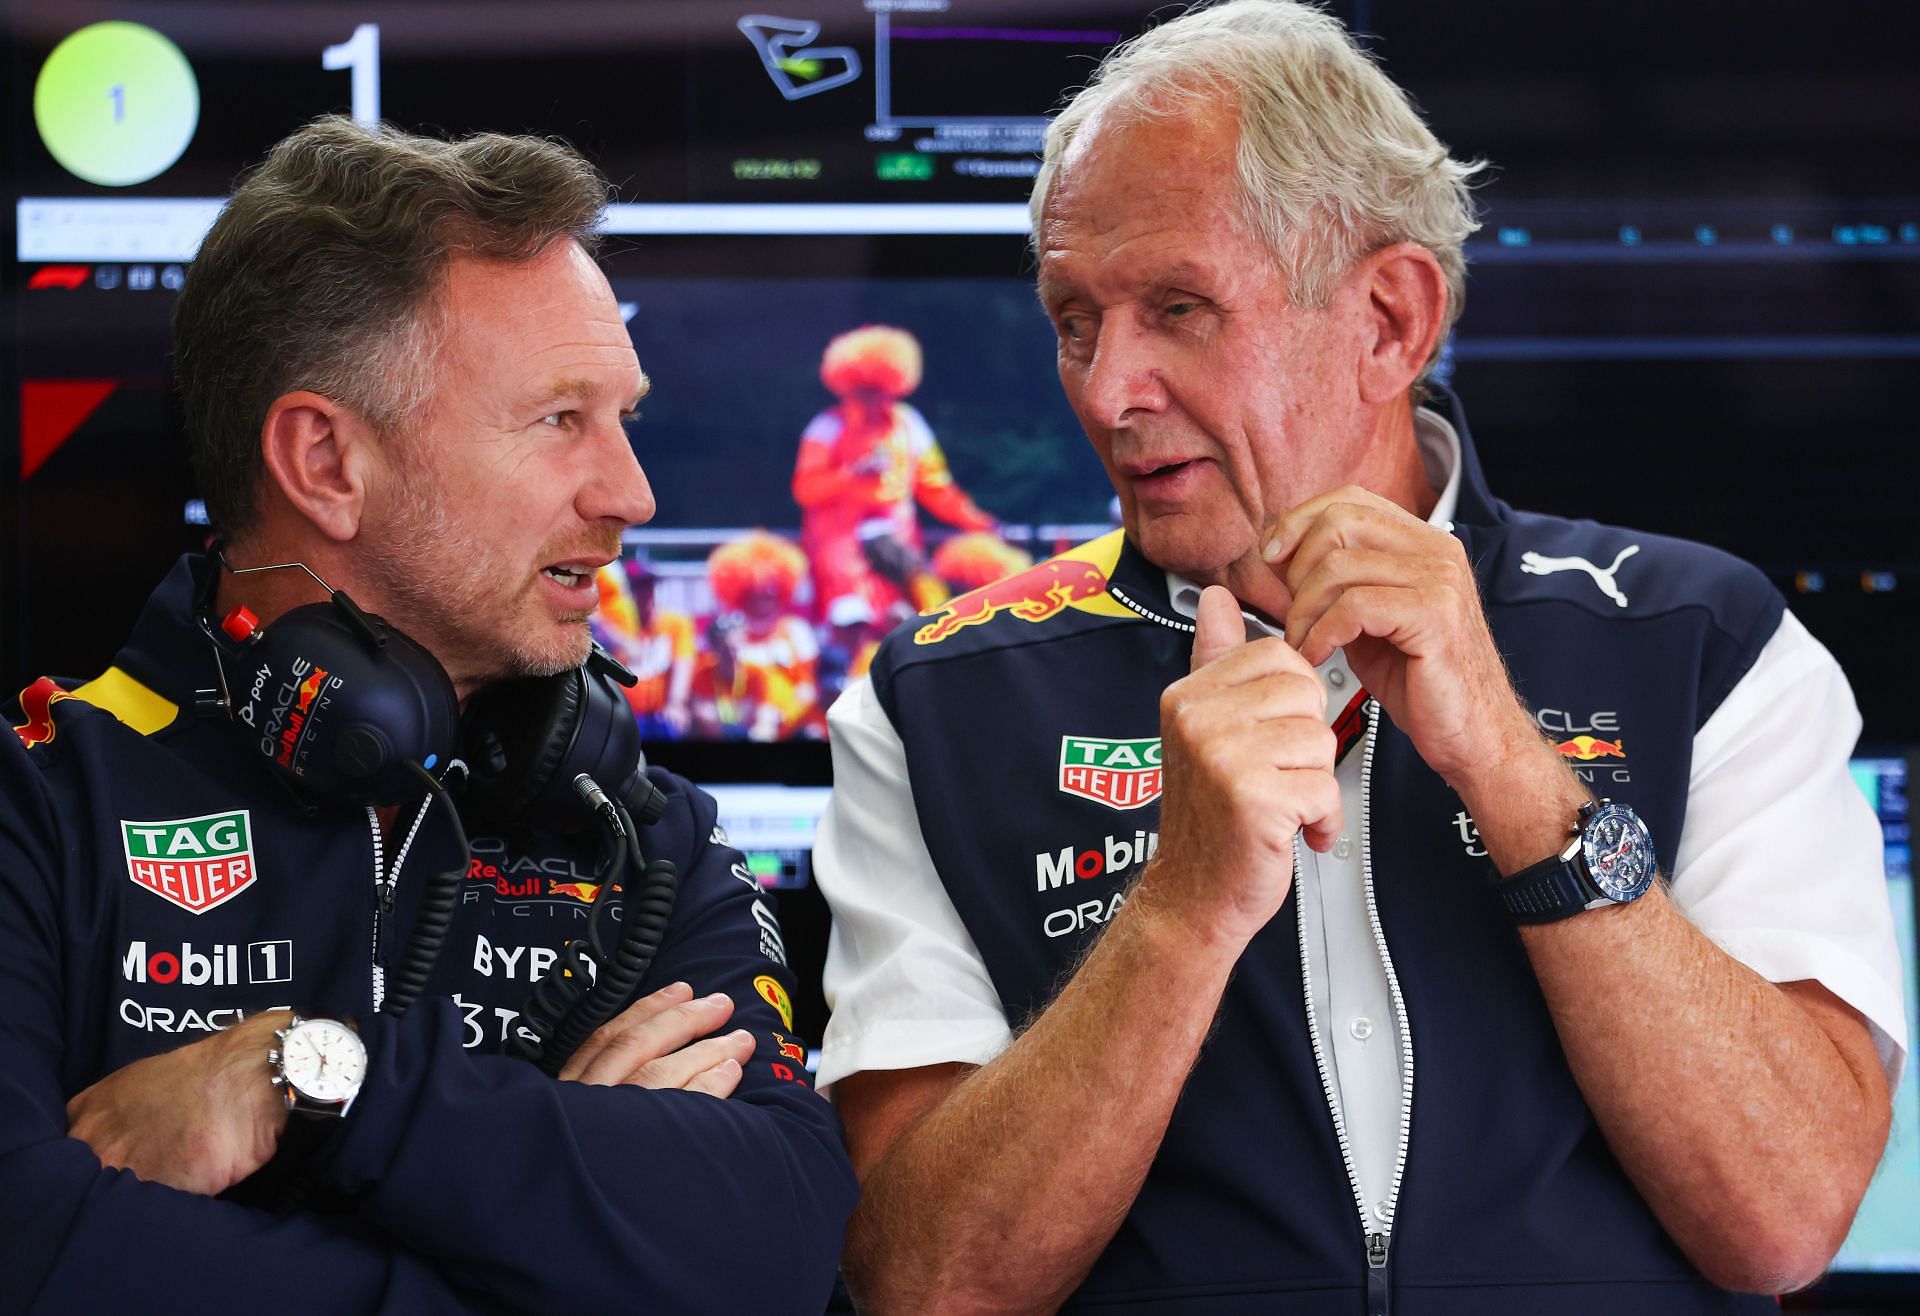 Christian Horner feels the Cost Cap increment is a bit of a compromise